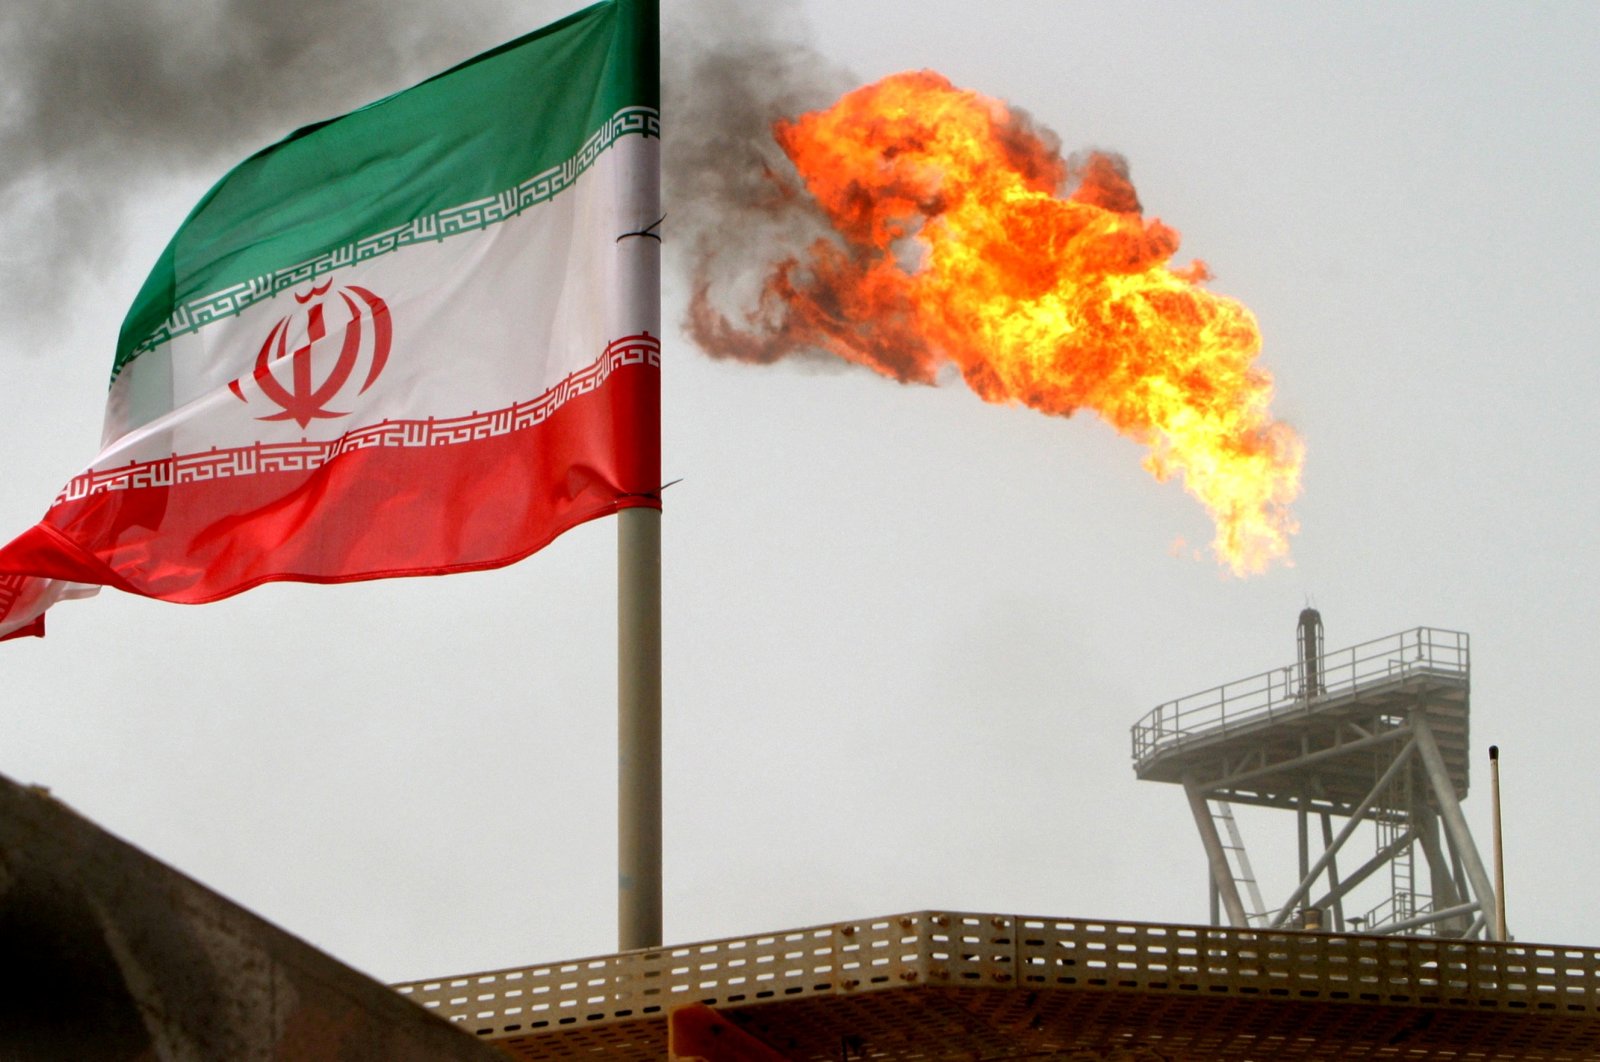 A gas flare-up on an oil production platform is seen alongside an Iranian flag in the Gulf, July 25, 2005. (Reuters Photo)